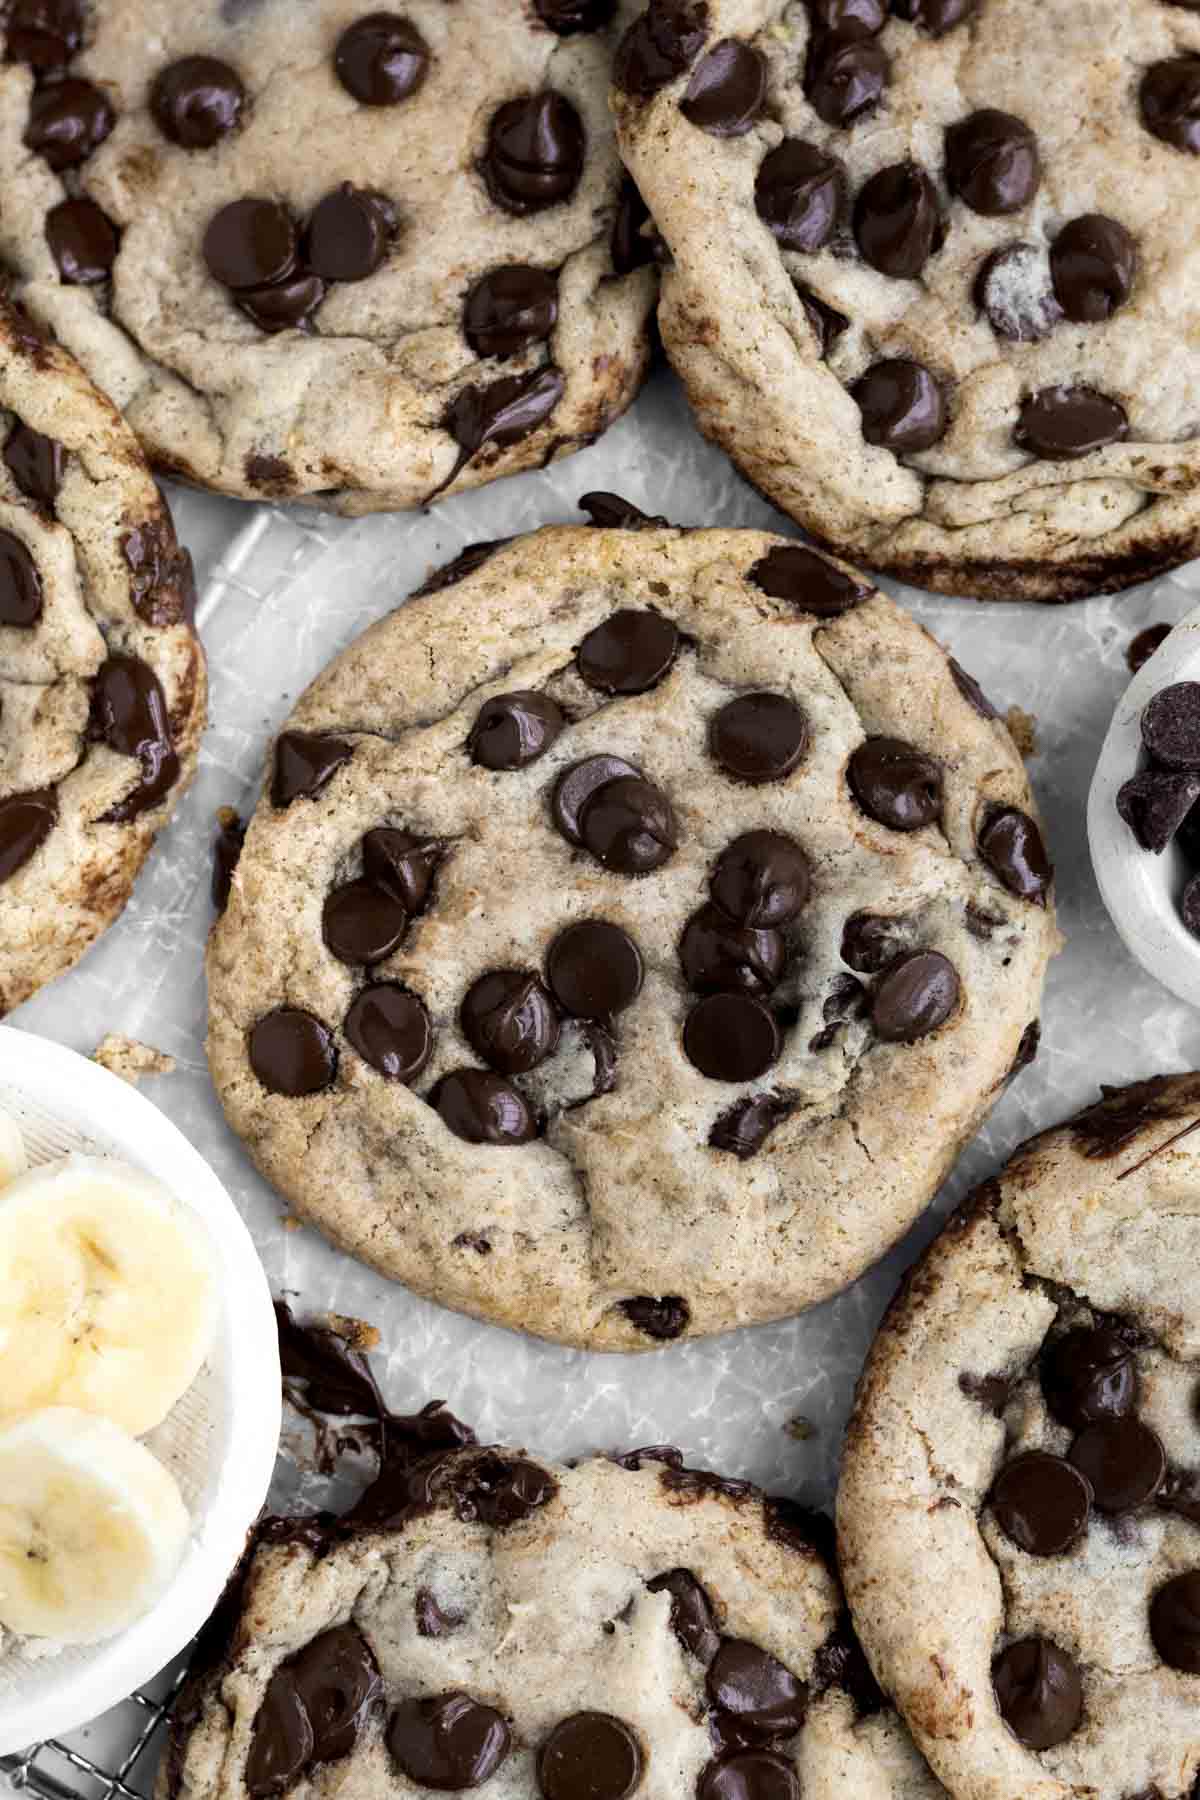 Delicious golden tan Banana Bread Cookies with sweet melted chocolate chips await your taste buds.